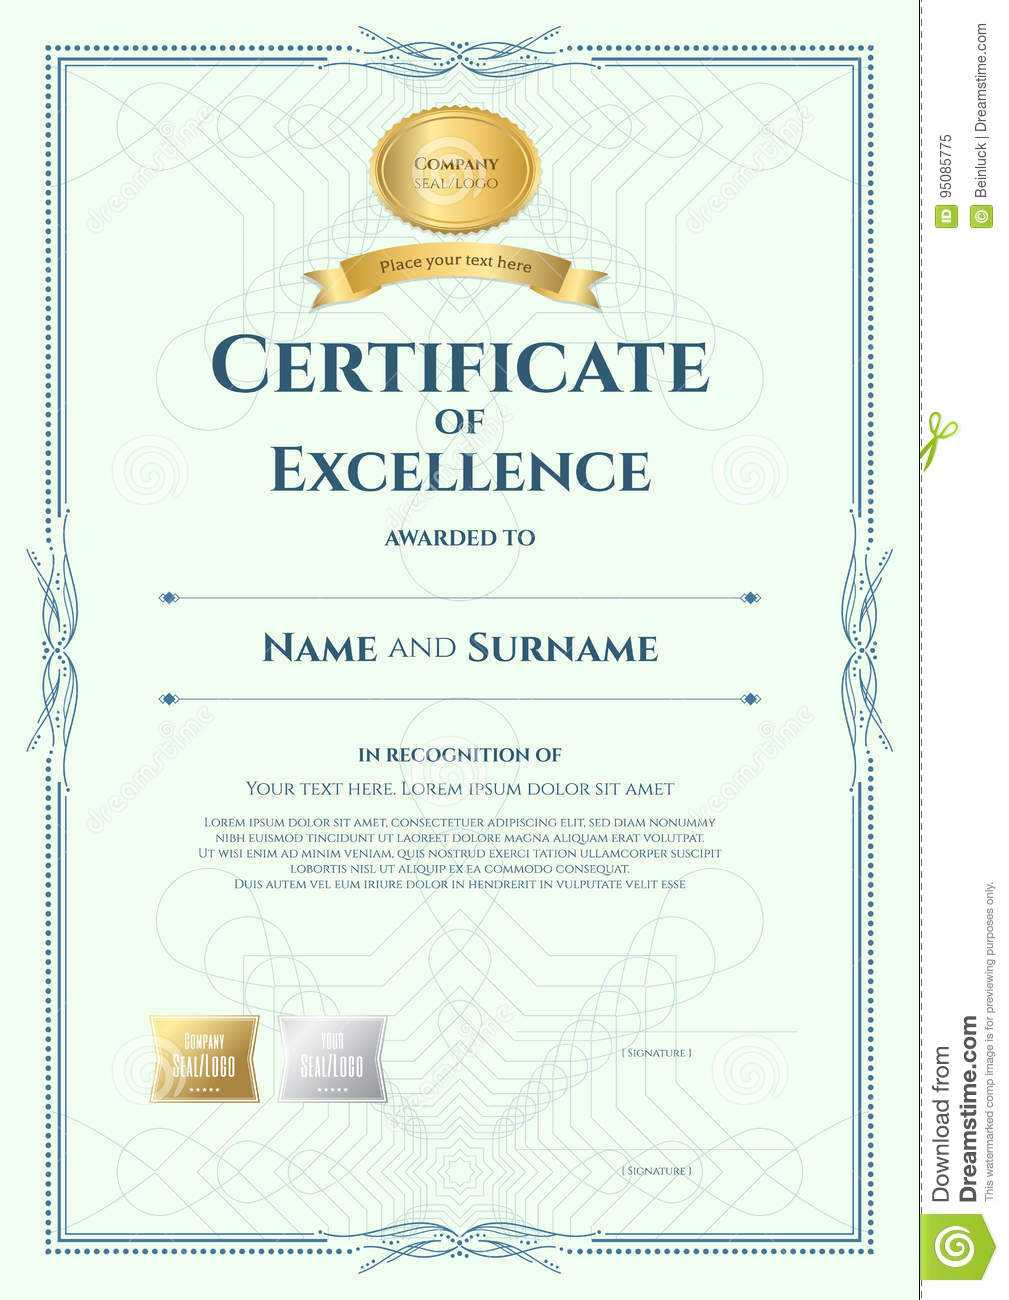 Portrait Certificate Of Excellence Template With Award Within Award Of Excellence Certificate Template